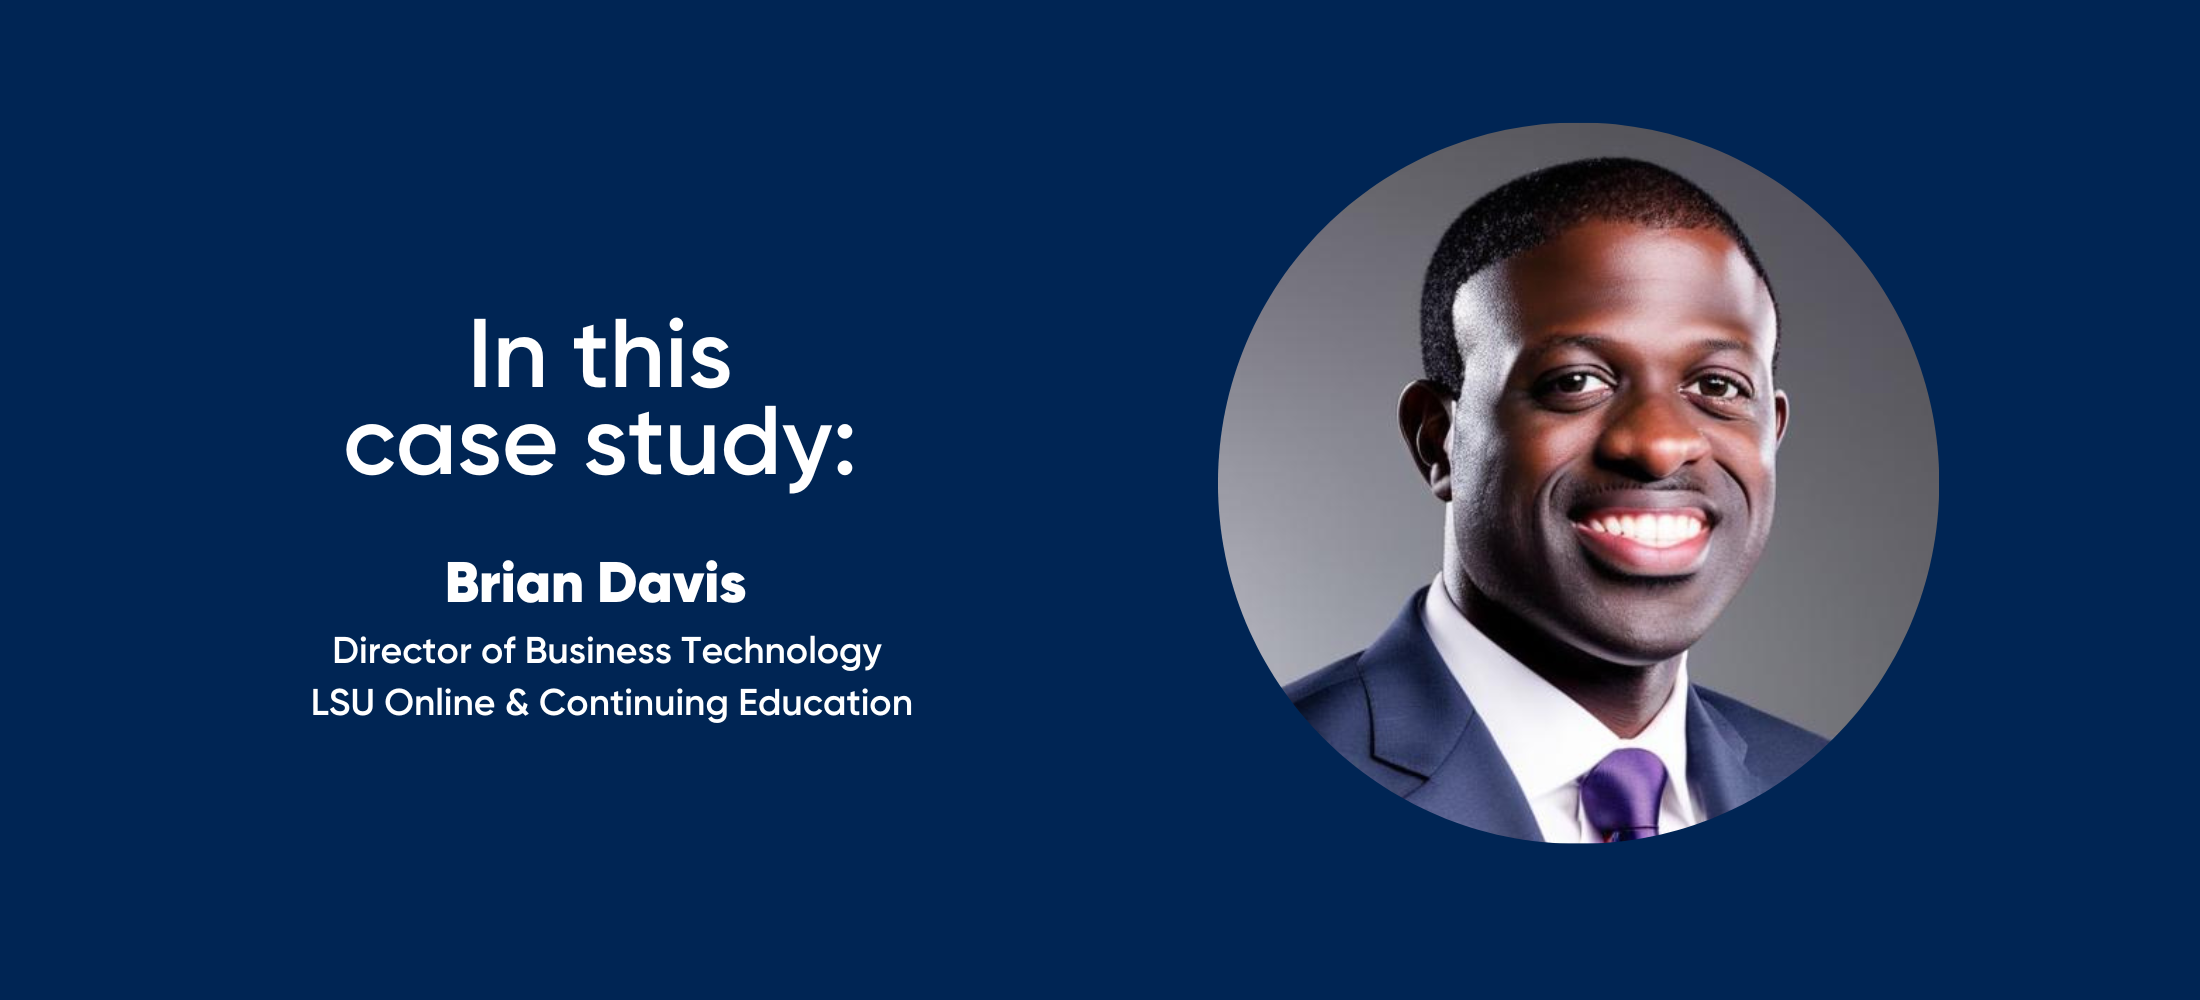 in this case study: Brian Davis - Director of Business Technology LSU OCE